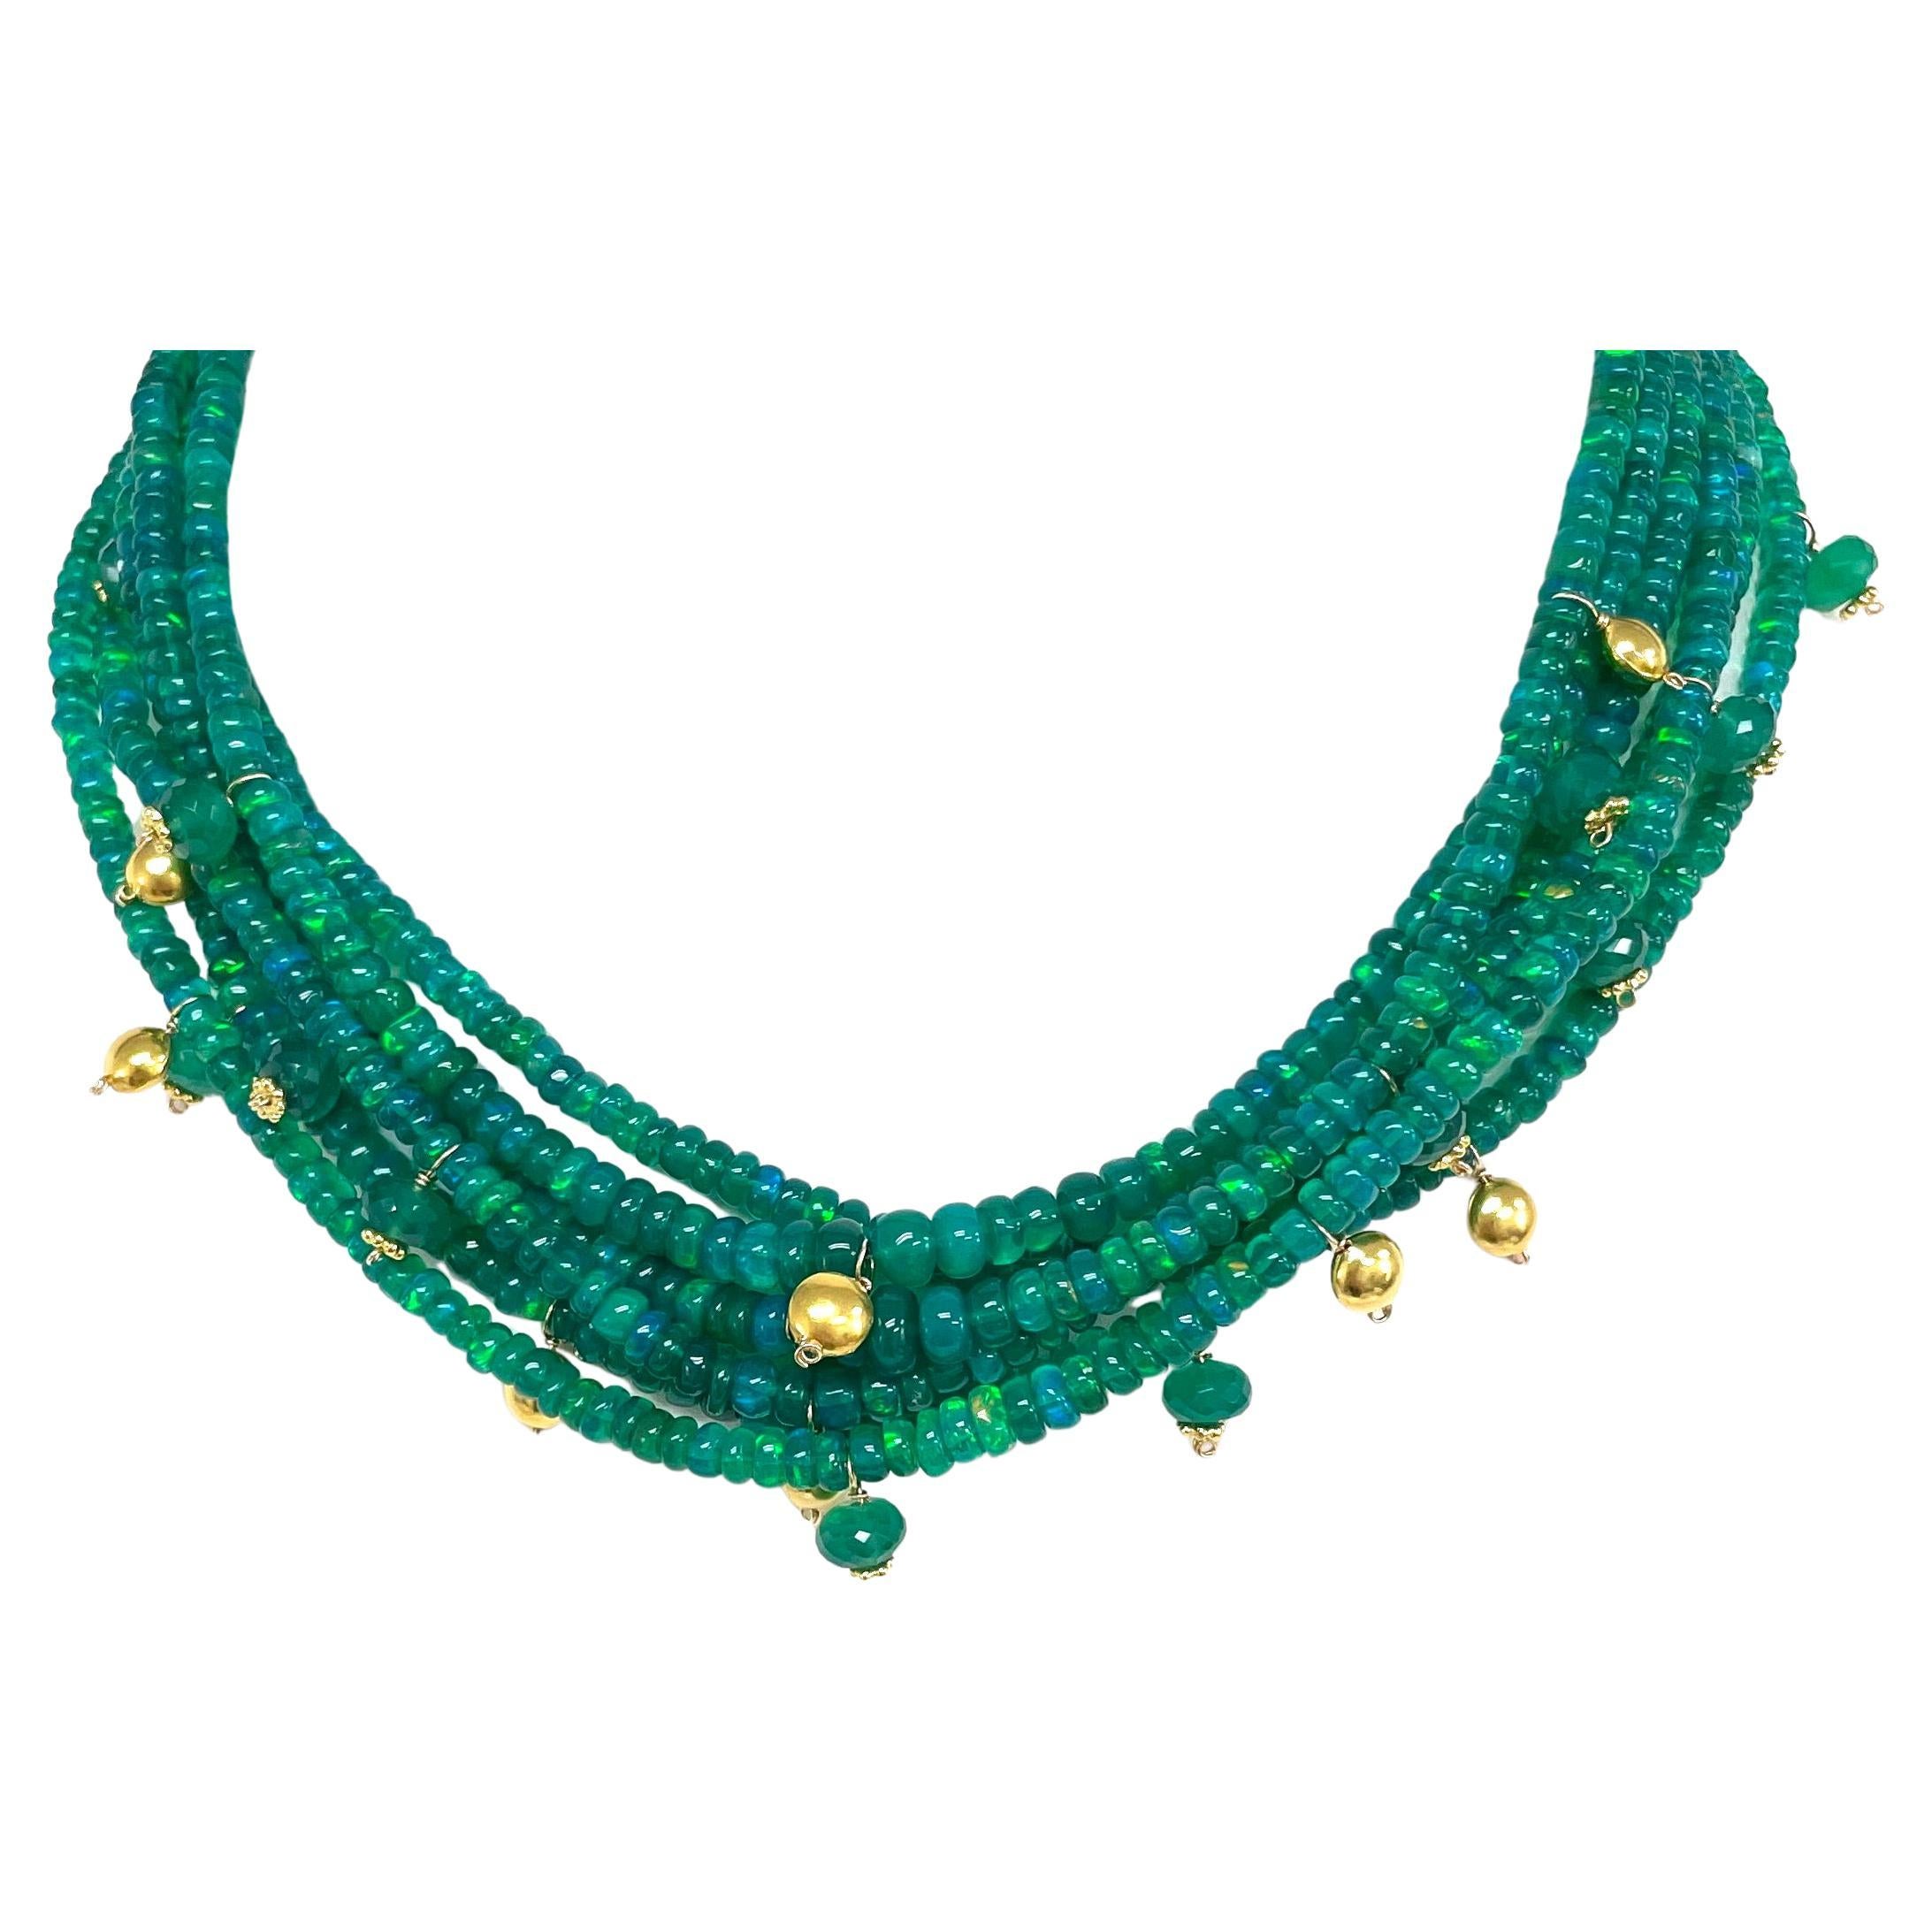 Green Opal with Dangling 18k YG Accents Multistrand Necklace In New Condition For Sale In Laguna Beach, CA